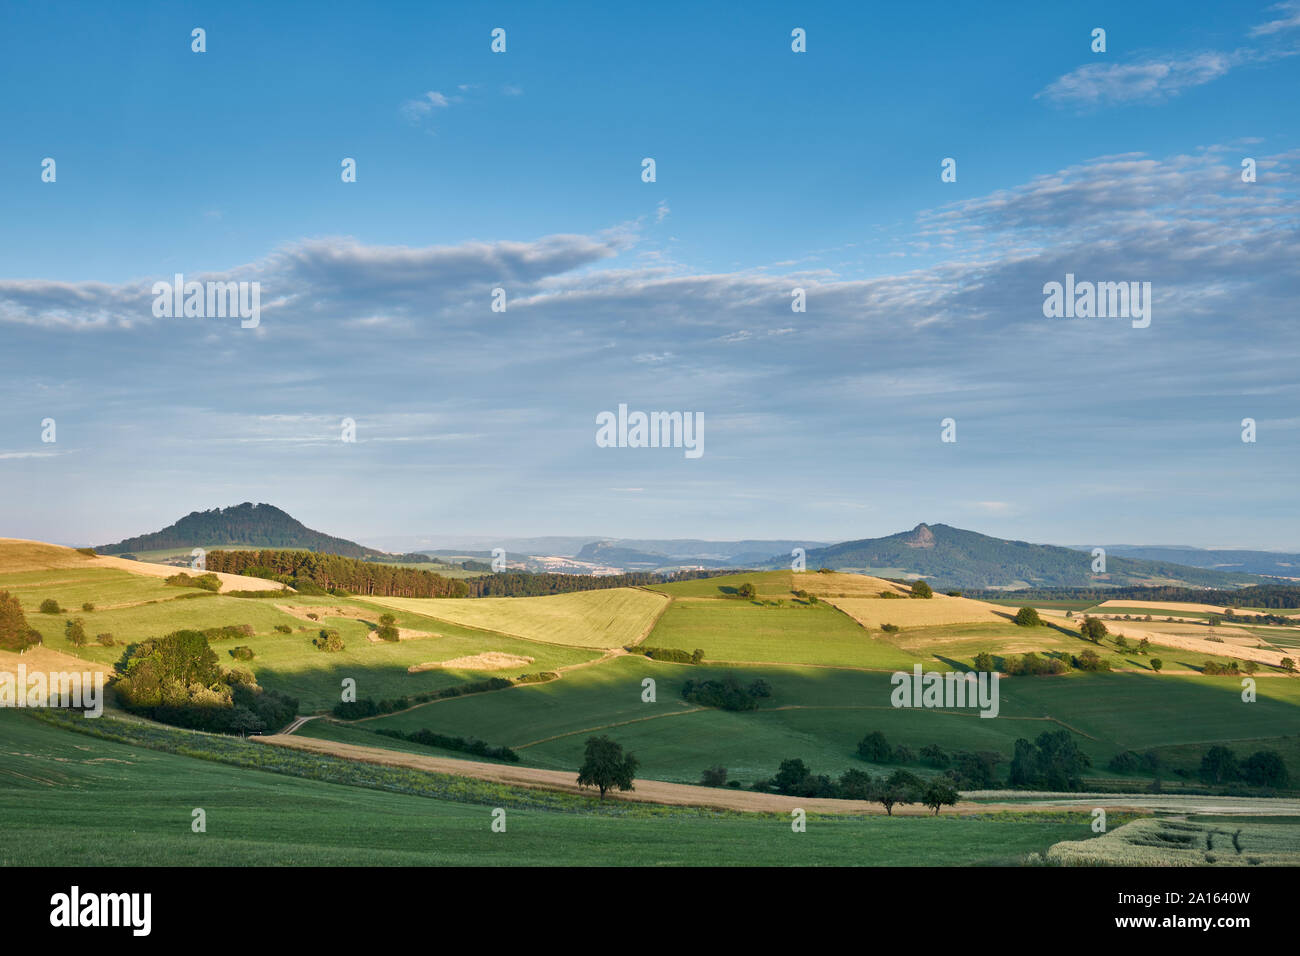 View over Volcanic Landscape Hegau, Germany Stock Photo